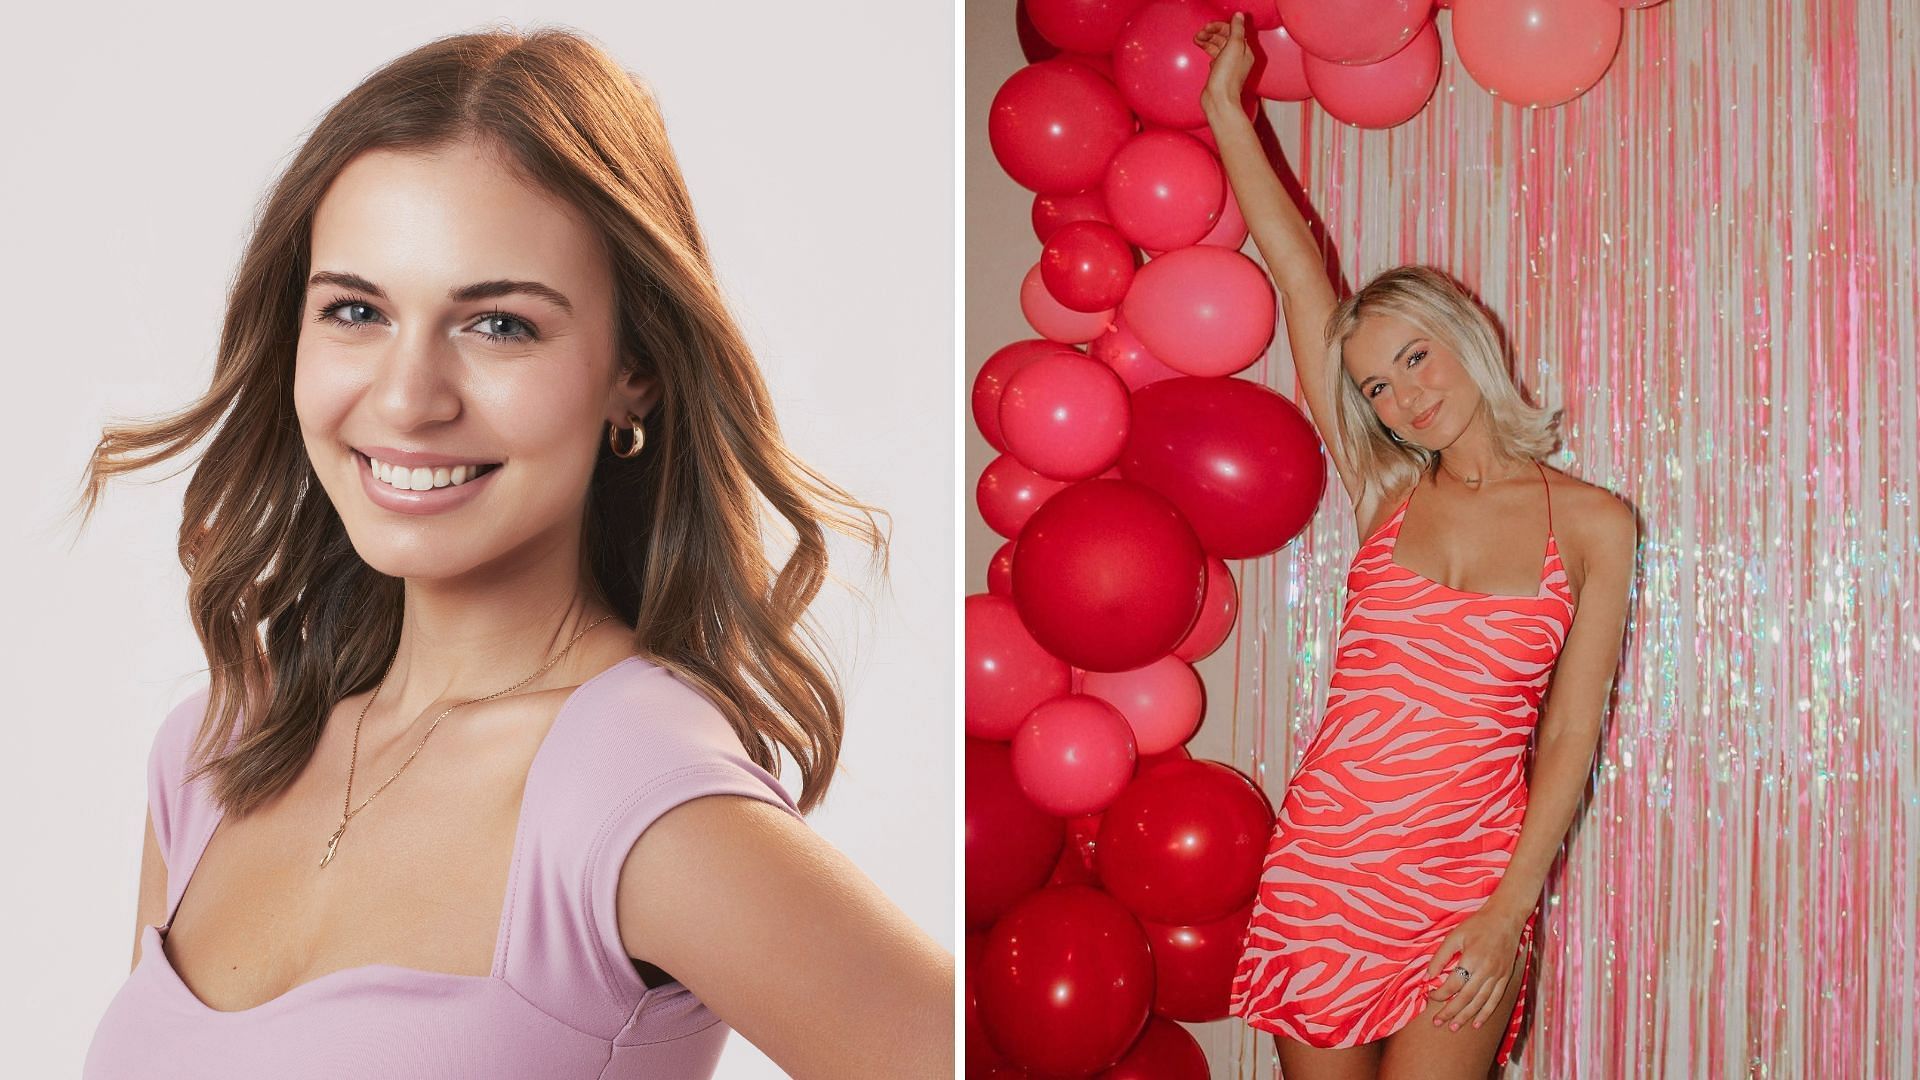 How old is Jess Girod? The Bachelor season 27 suitress describes